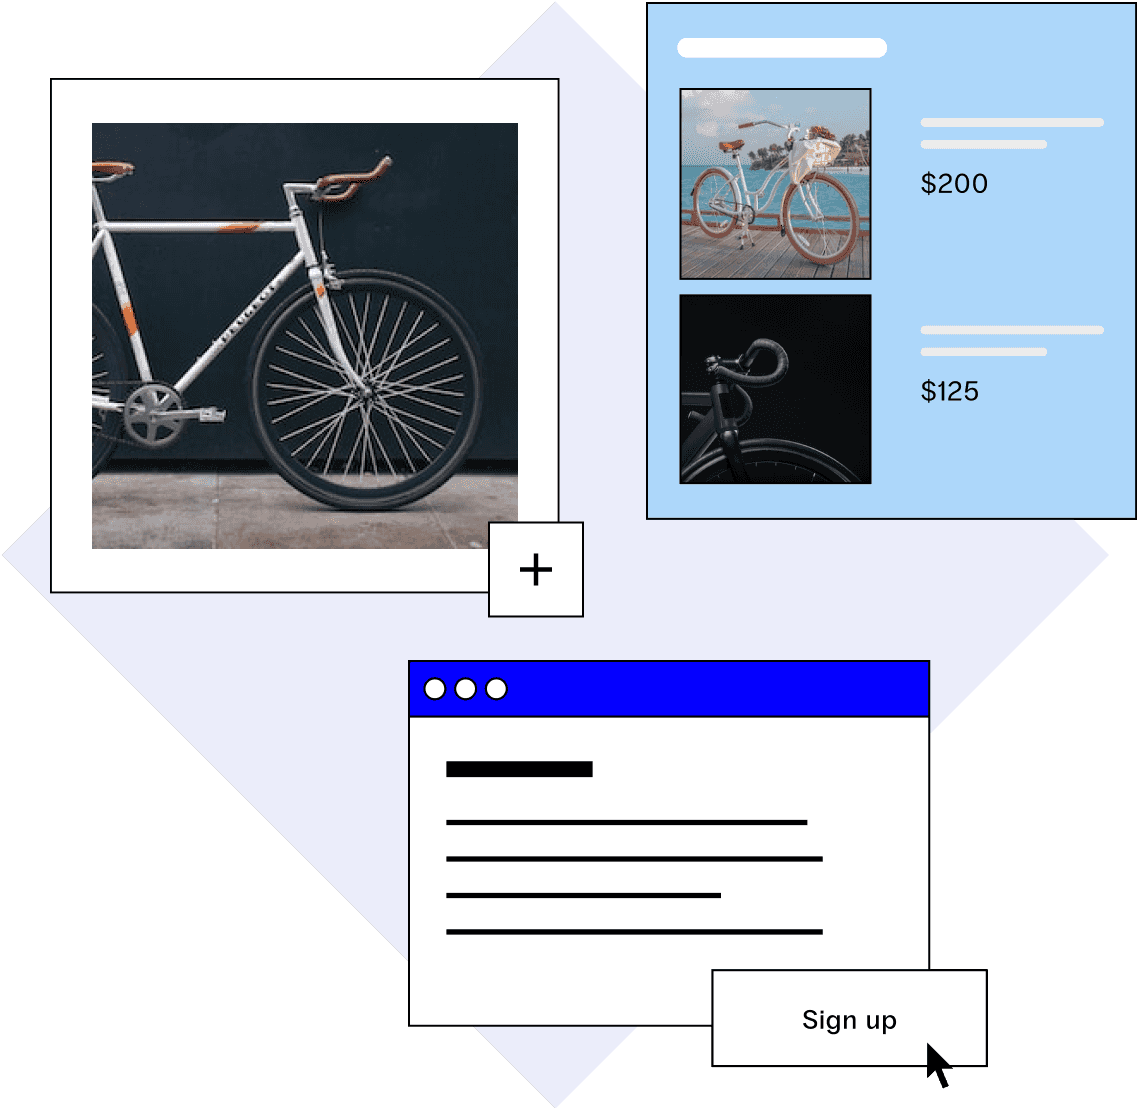 An online store selling bicycles shows a road bike, sign up form, and online cart including a $200 cruise bike and $125 road bike.